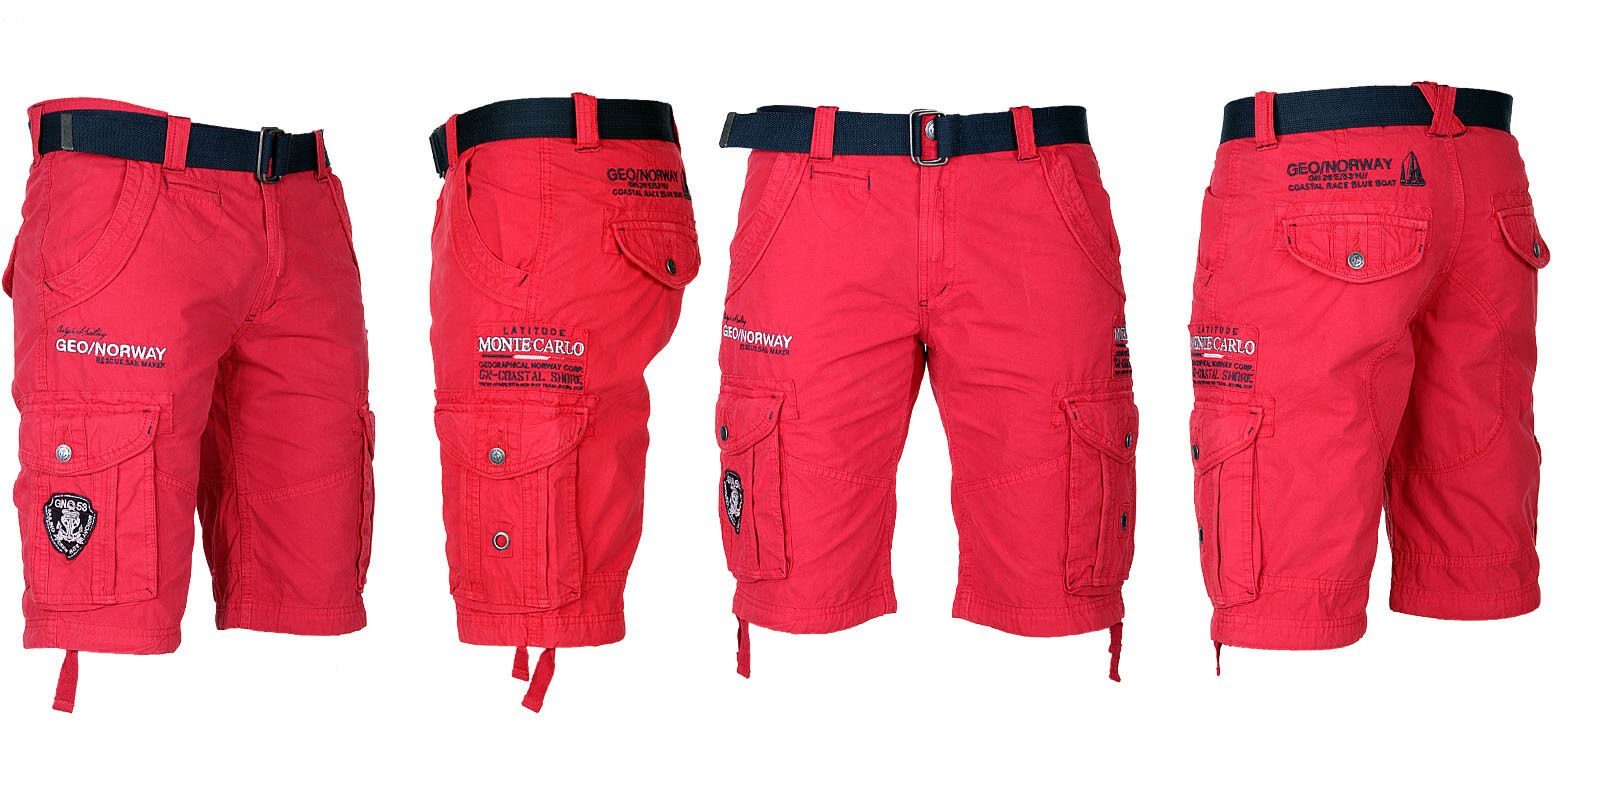 Geographical Norway Shorts Herren Cargo Shorts Kurze Hose SHORT Bermuda knielang Poudre Sommer Rot